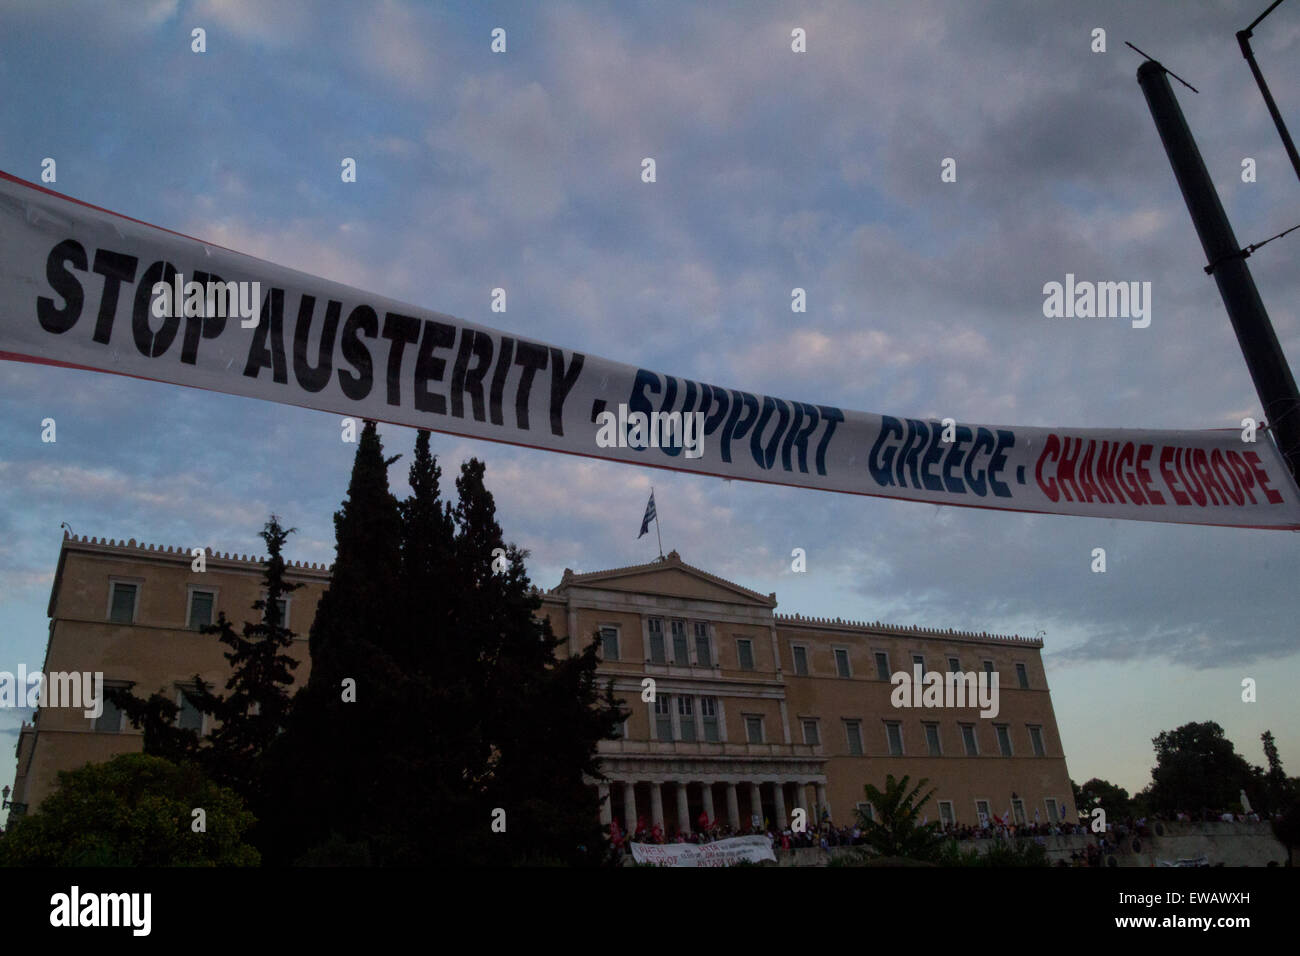 Athens, Greece. 21st June, 2015. An anti-austerity banner is seen in front of the Parliament building. Greeks demonstrate against austerity prior to Monday's 22nd July Eurogroup which is possible to decide if Greece remains or exits Eurozone. Credit:  Kostas Pikoulas/Pacific Press/Alamy Live News Stock Photo